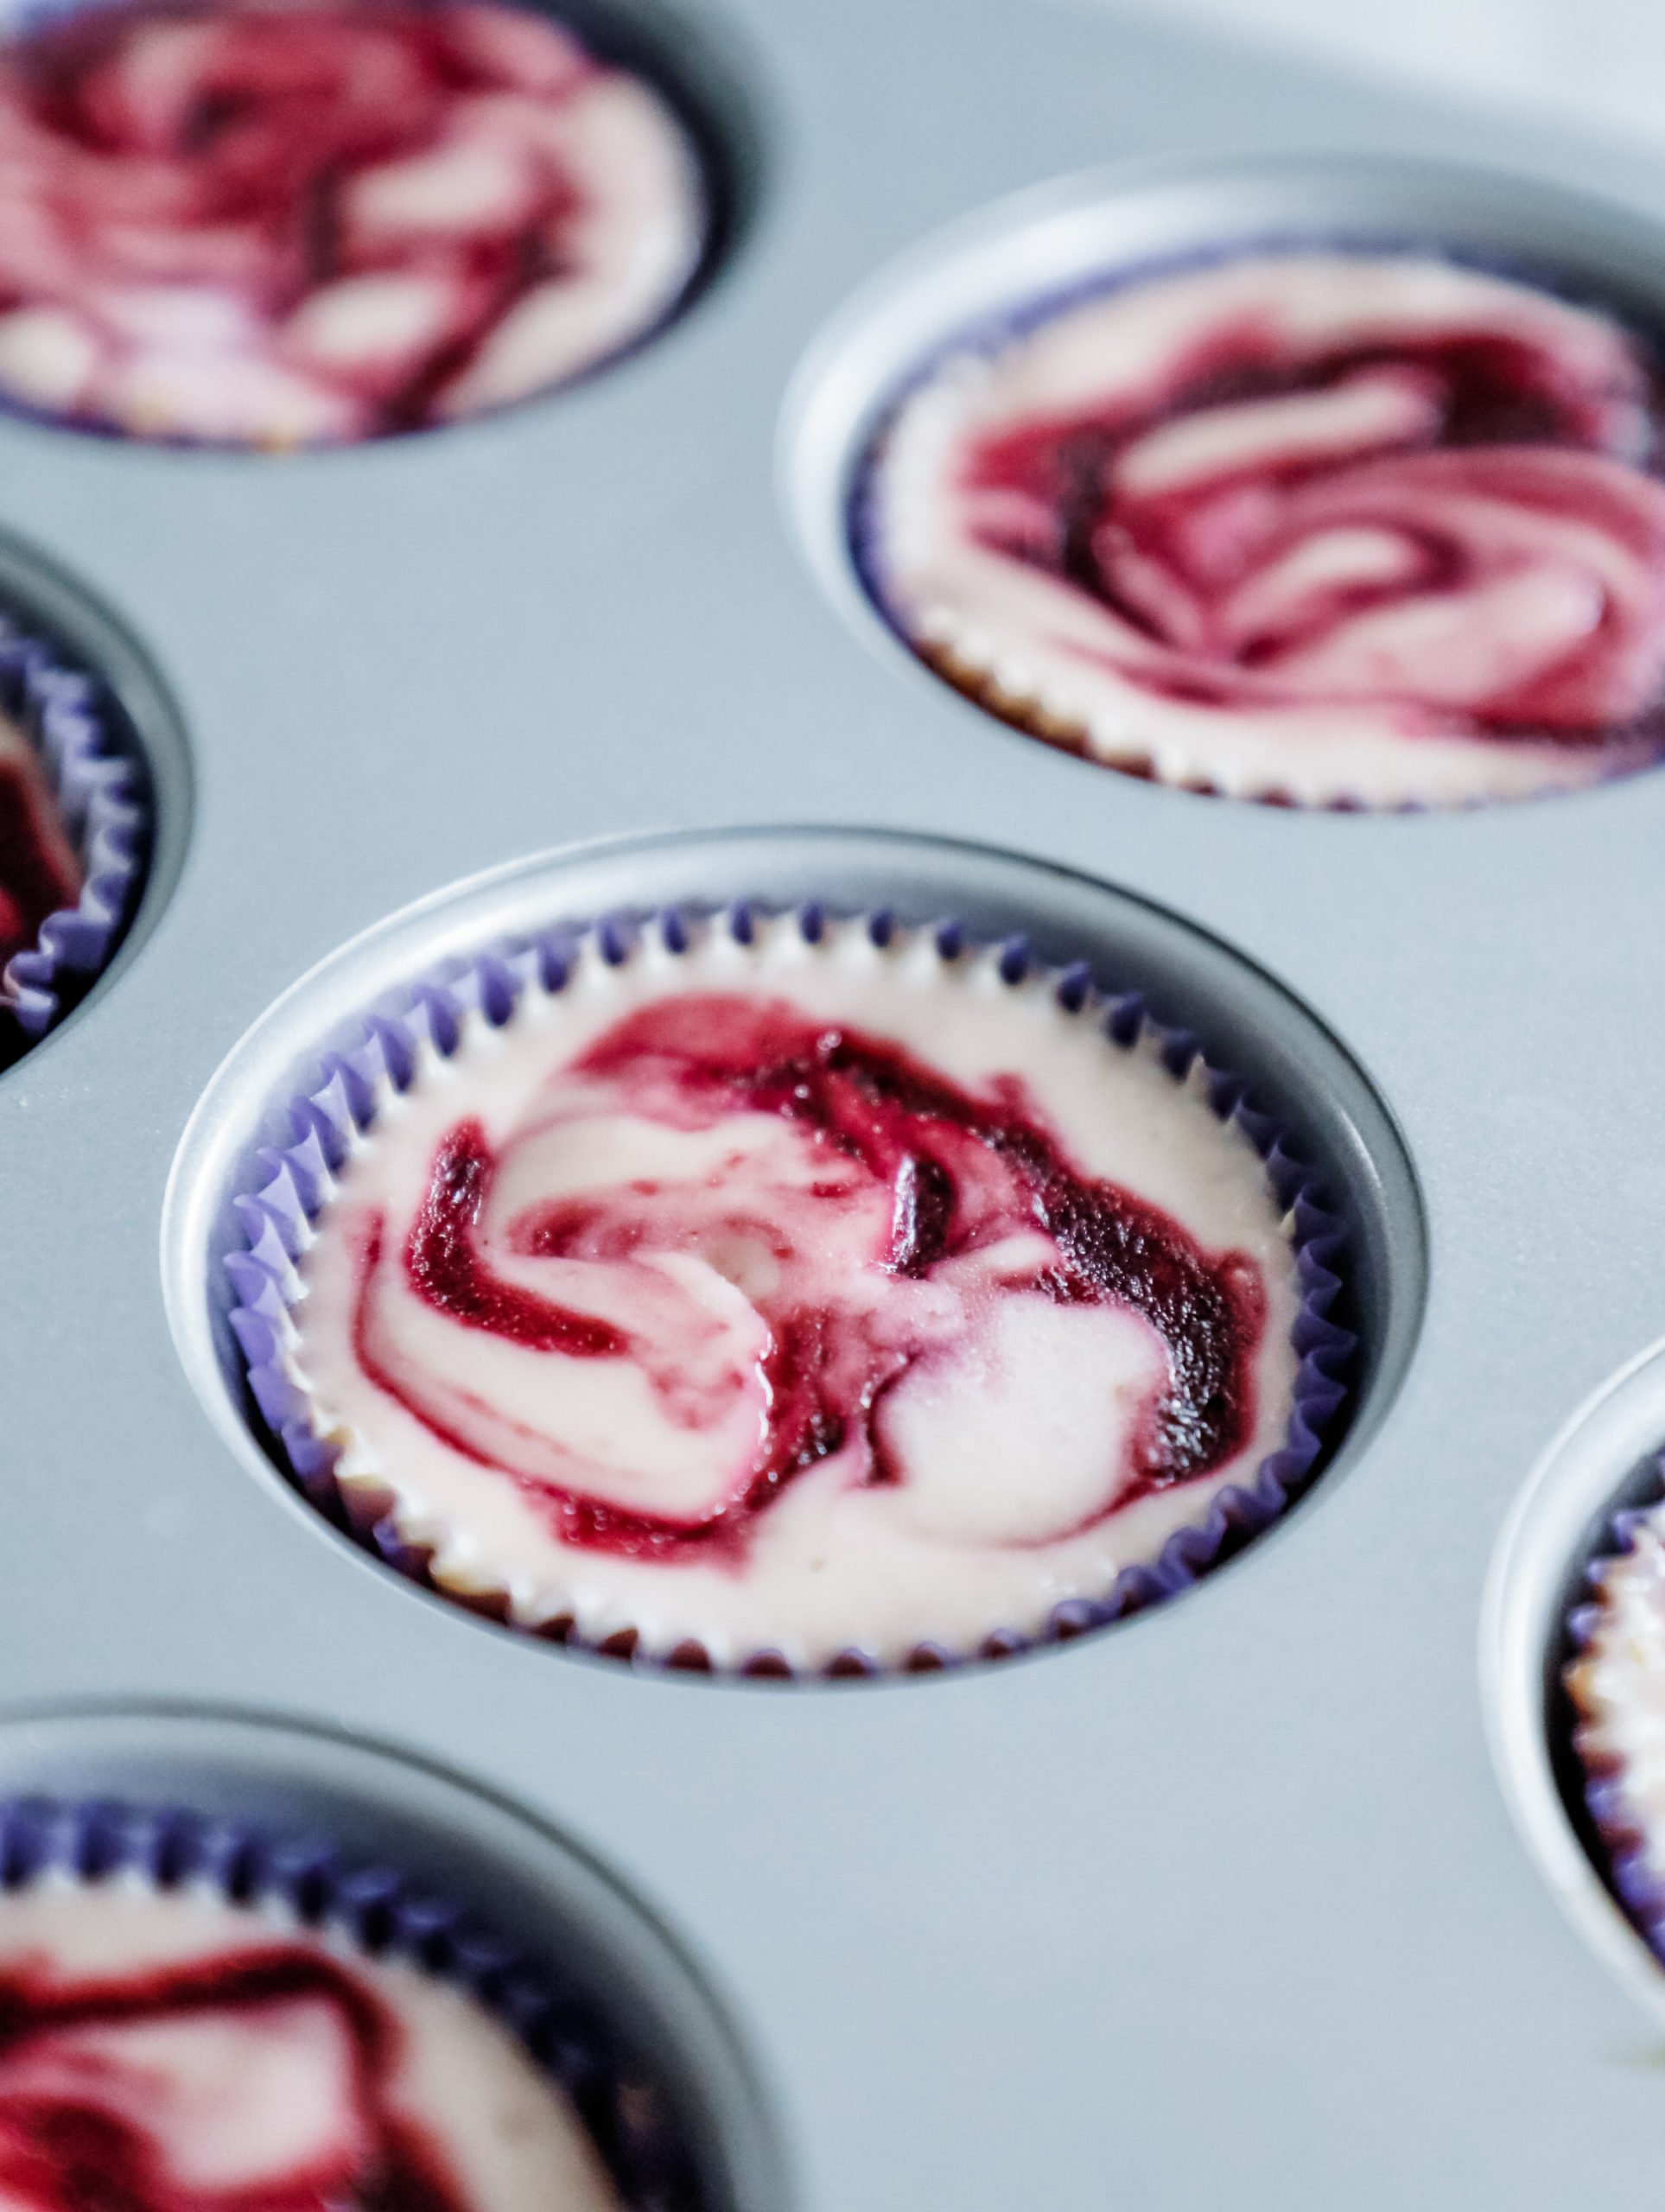 Blackberry cheesecake cup in a muffin lined muffin tin after baking.